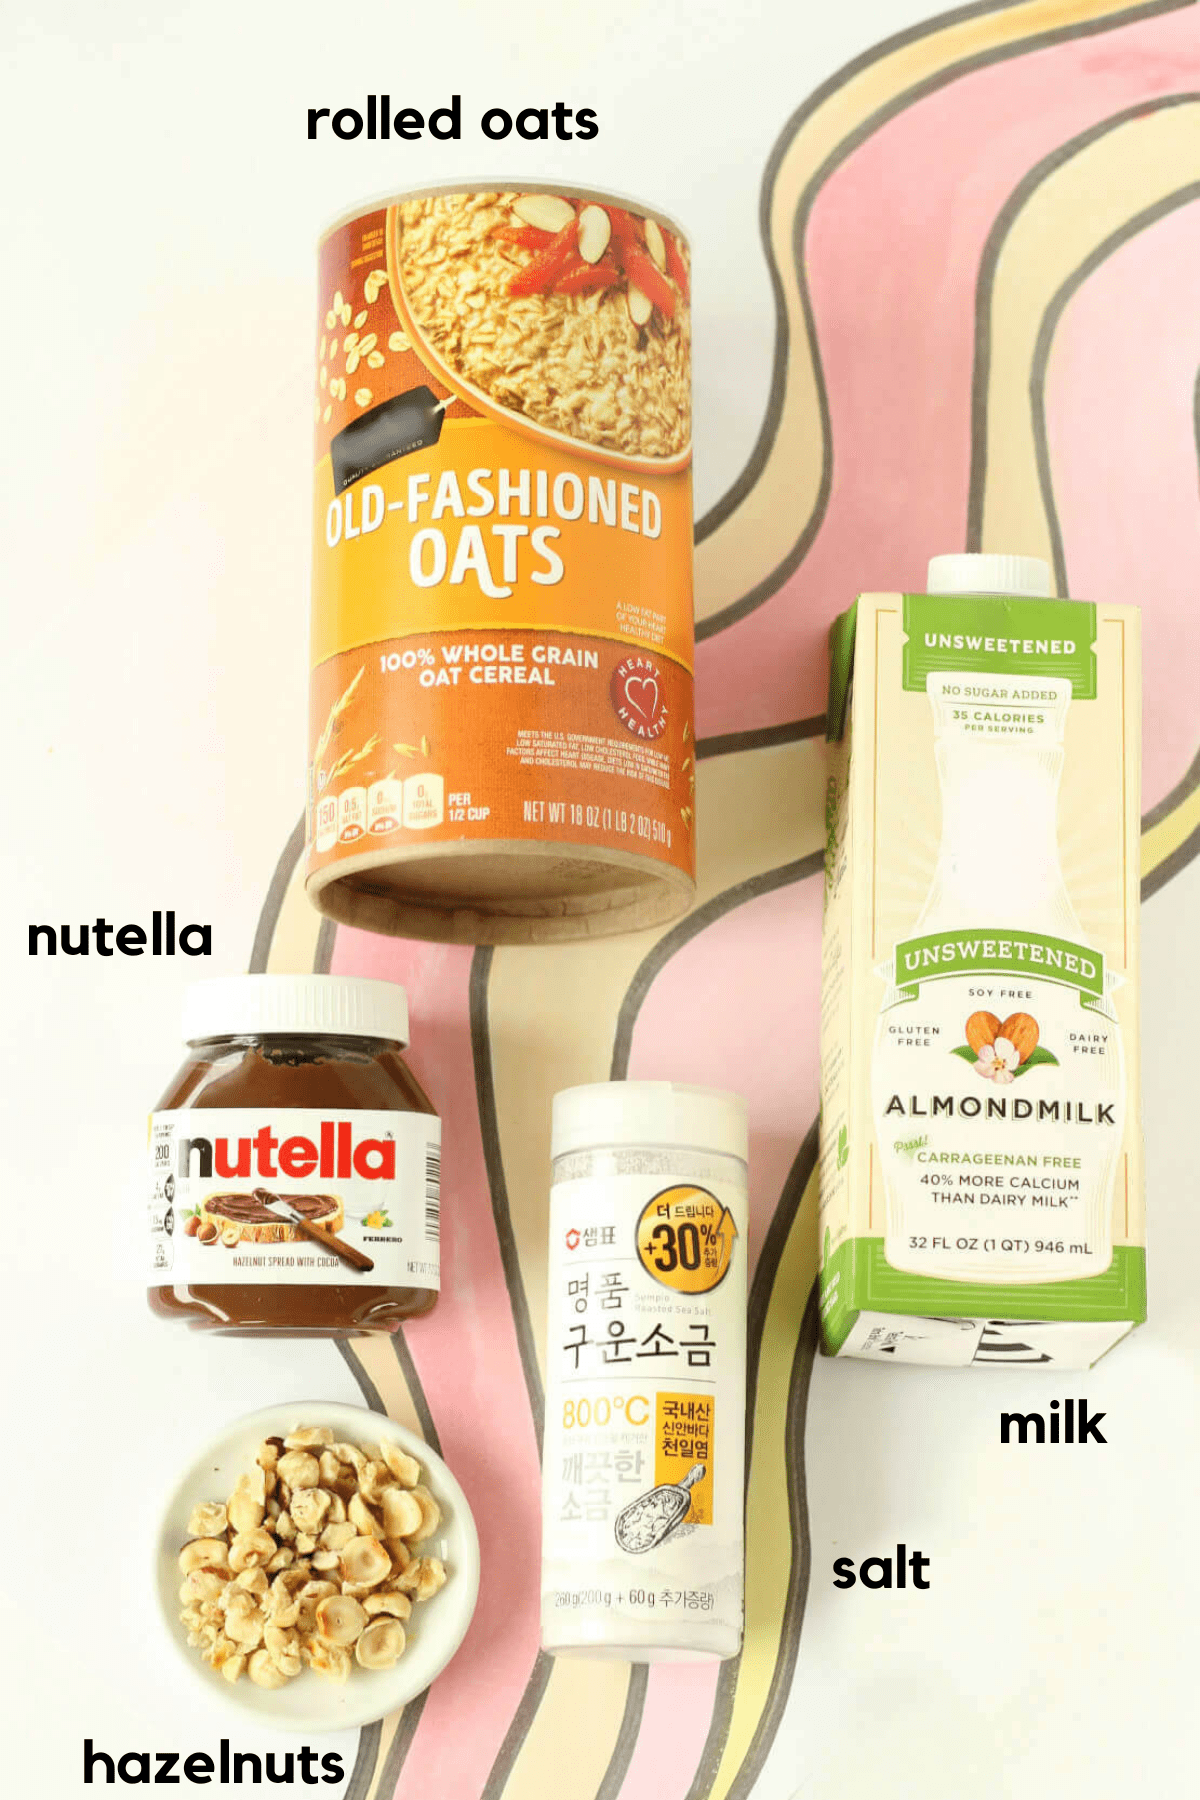 Ingredients laid out for Nutella overnight oats, including a canister of rolled oats, a carton of soy milk, salt, a jar of Nutella and chopped toasted hazelnuts.